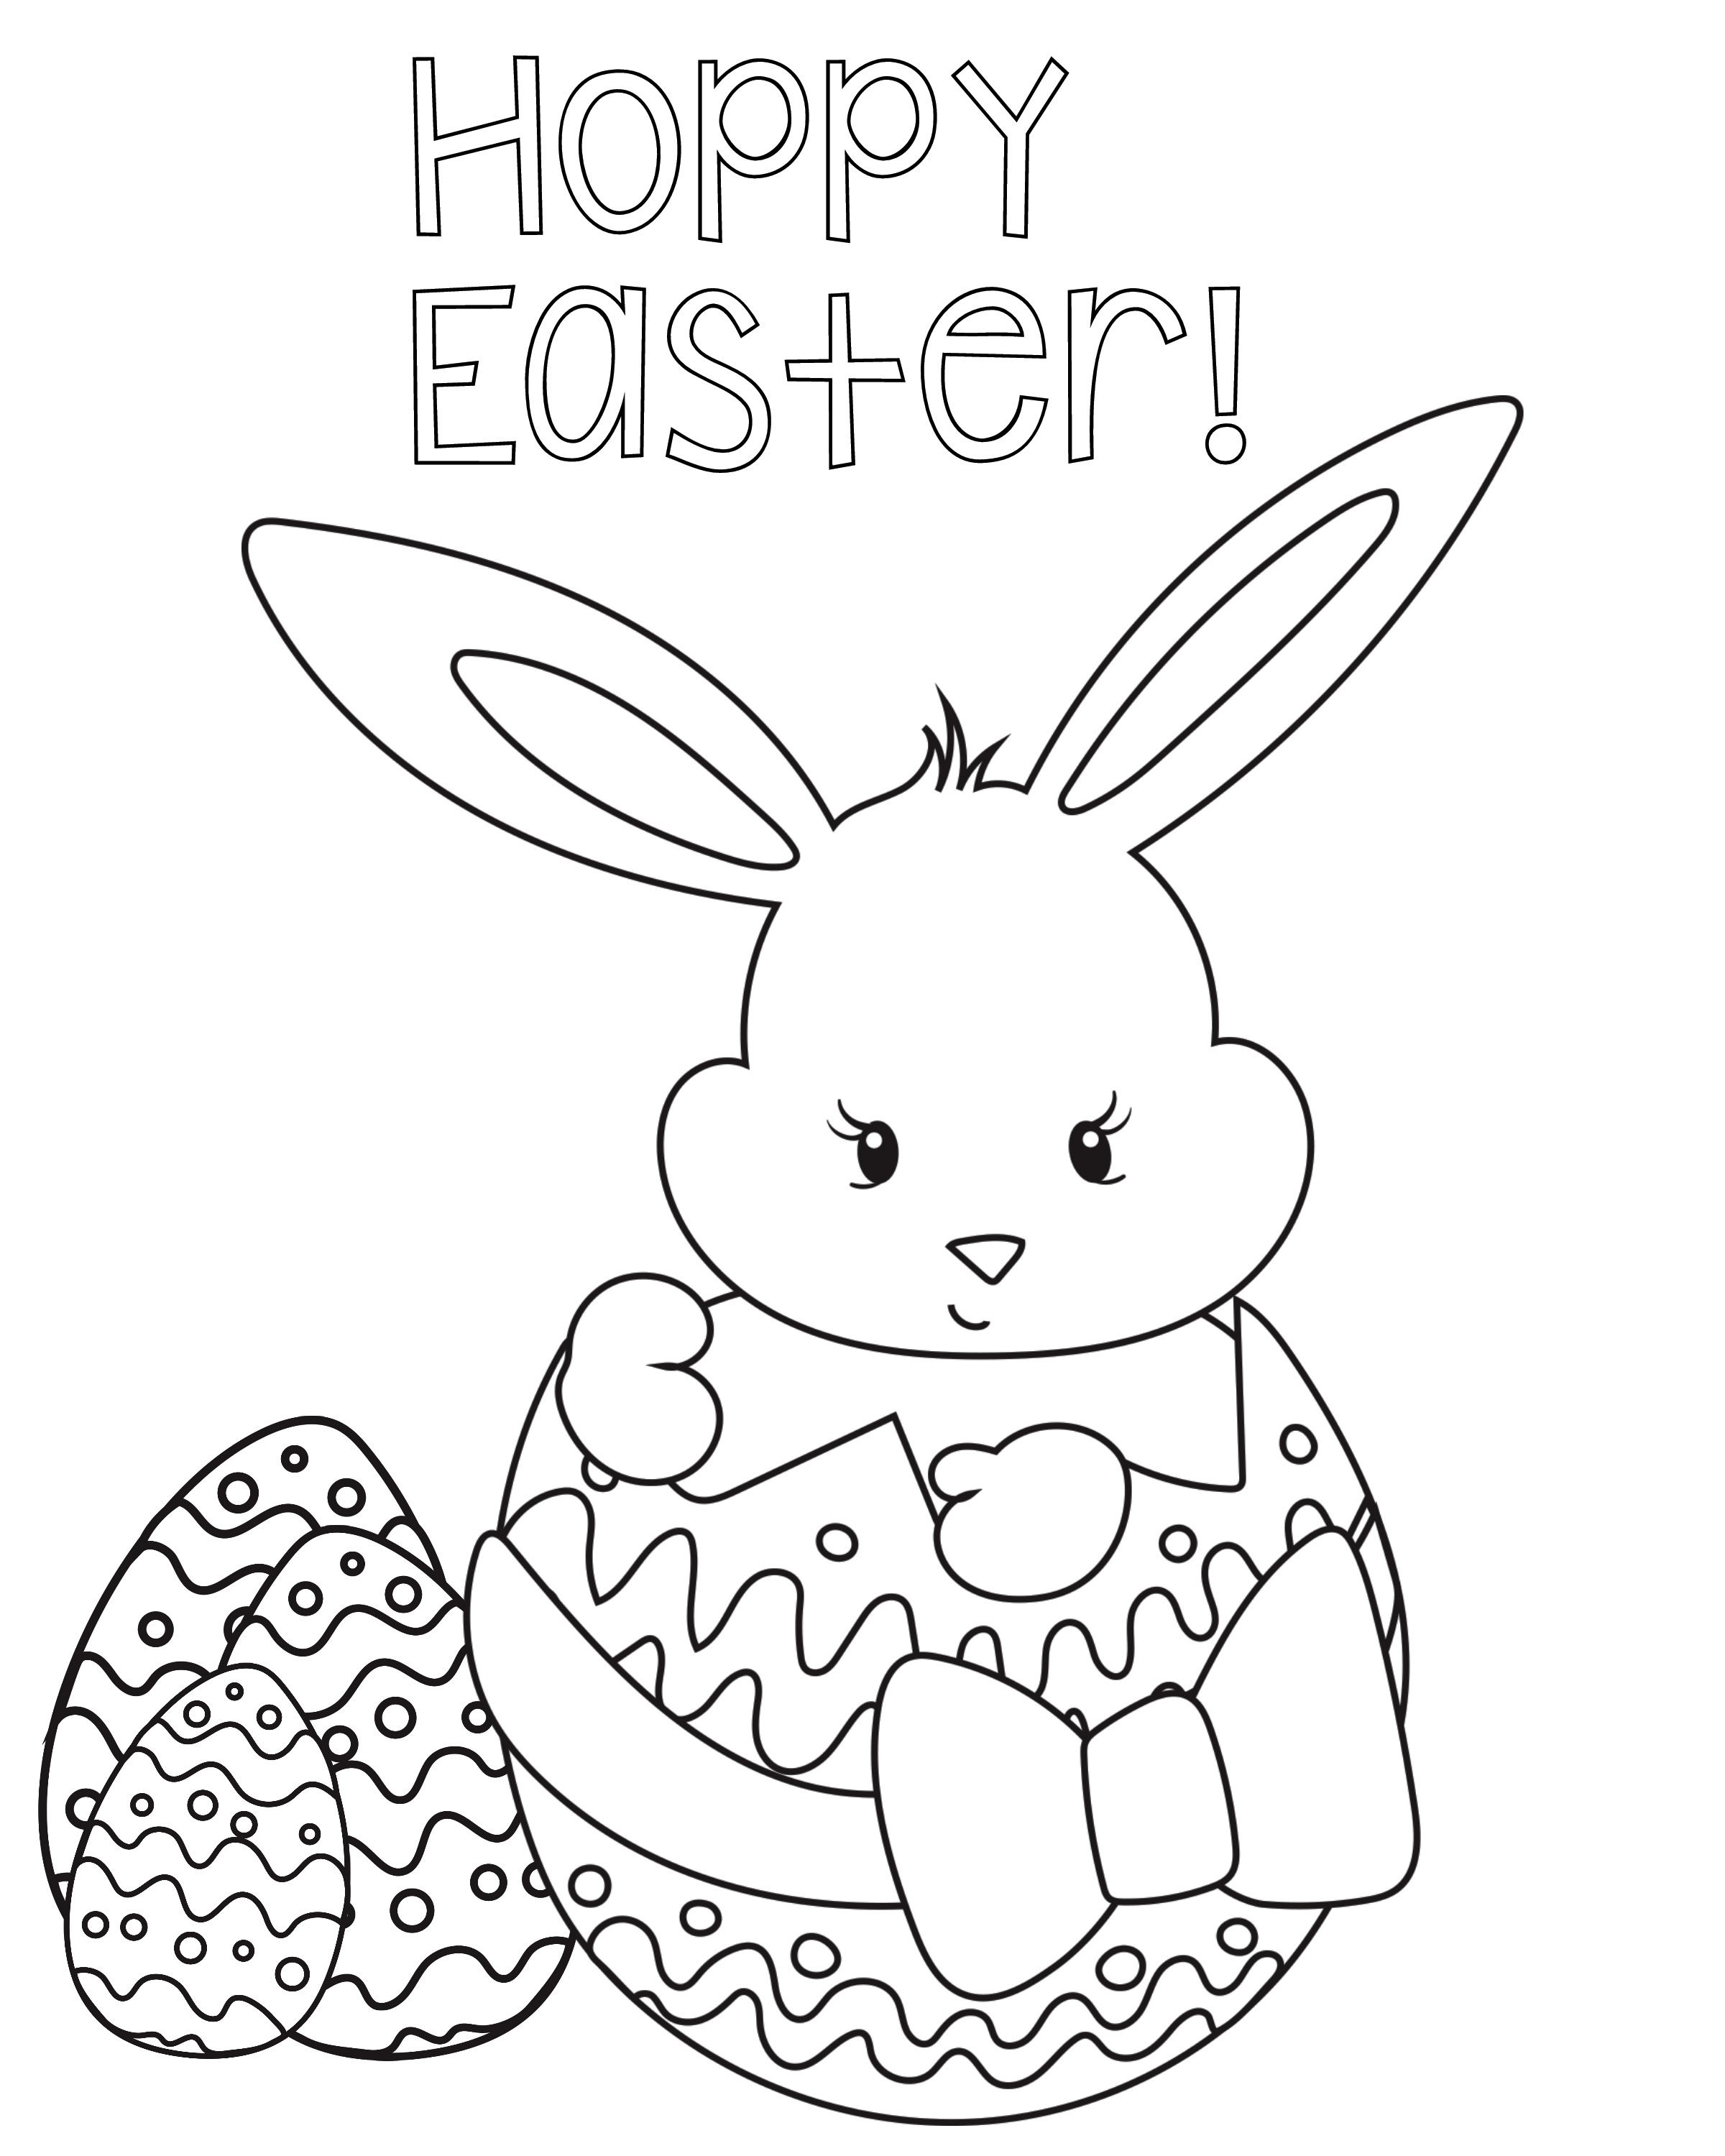 Happy Easter Egg Rabbit Coloring Page